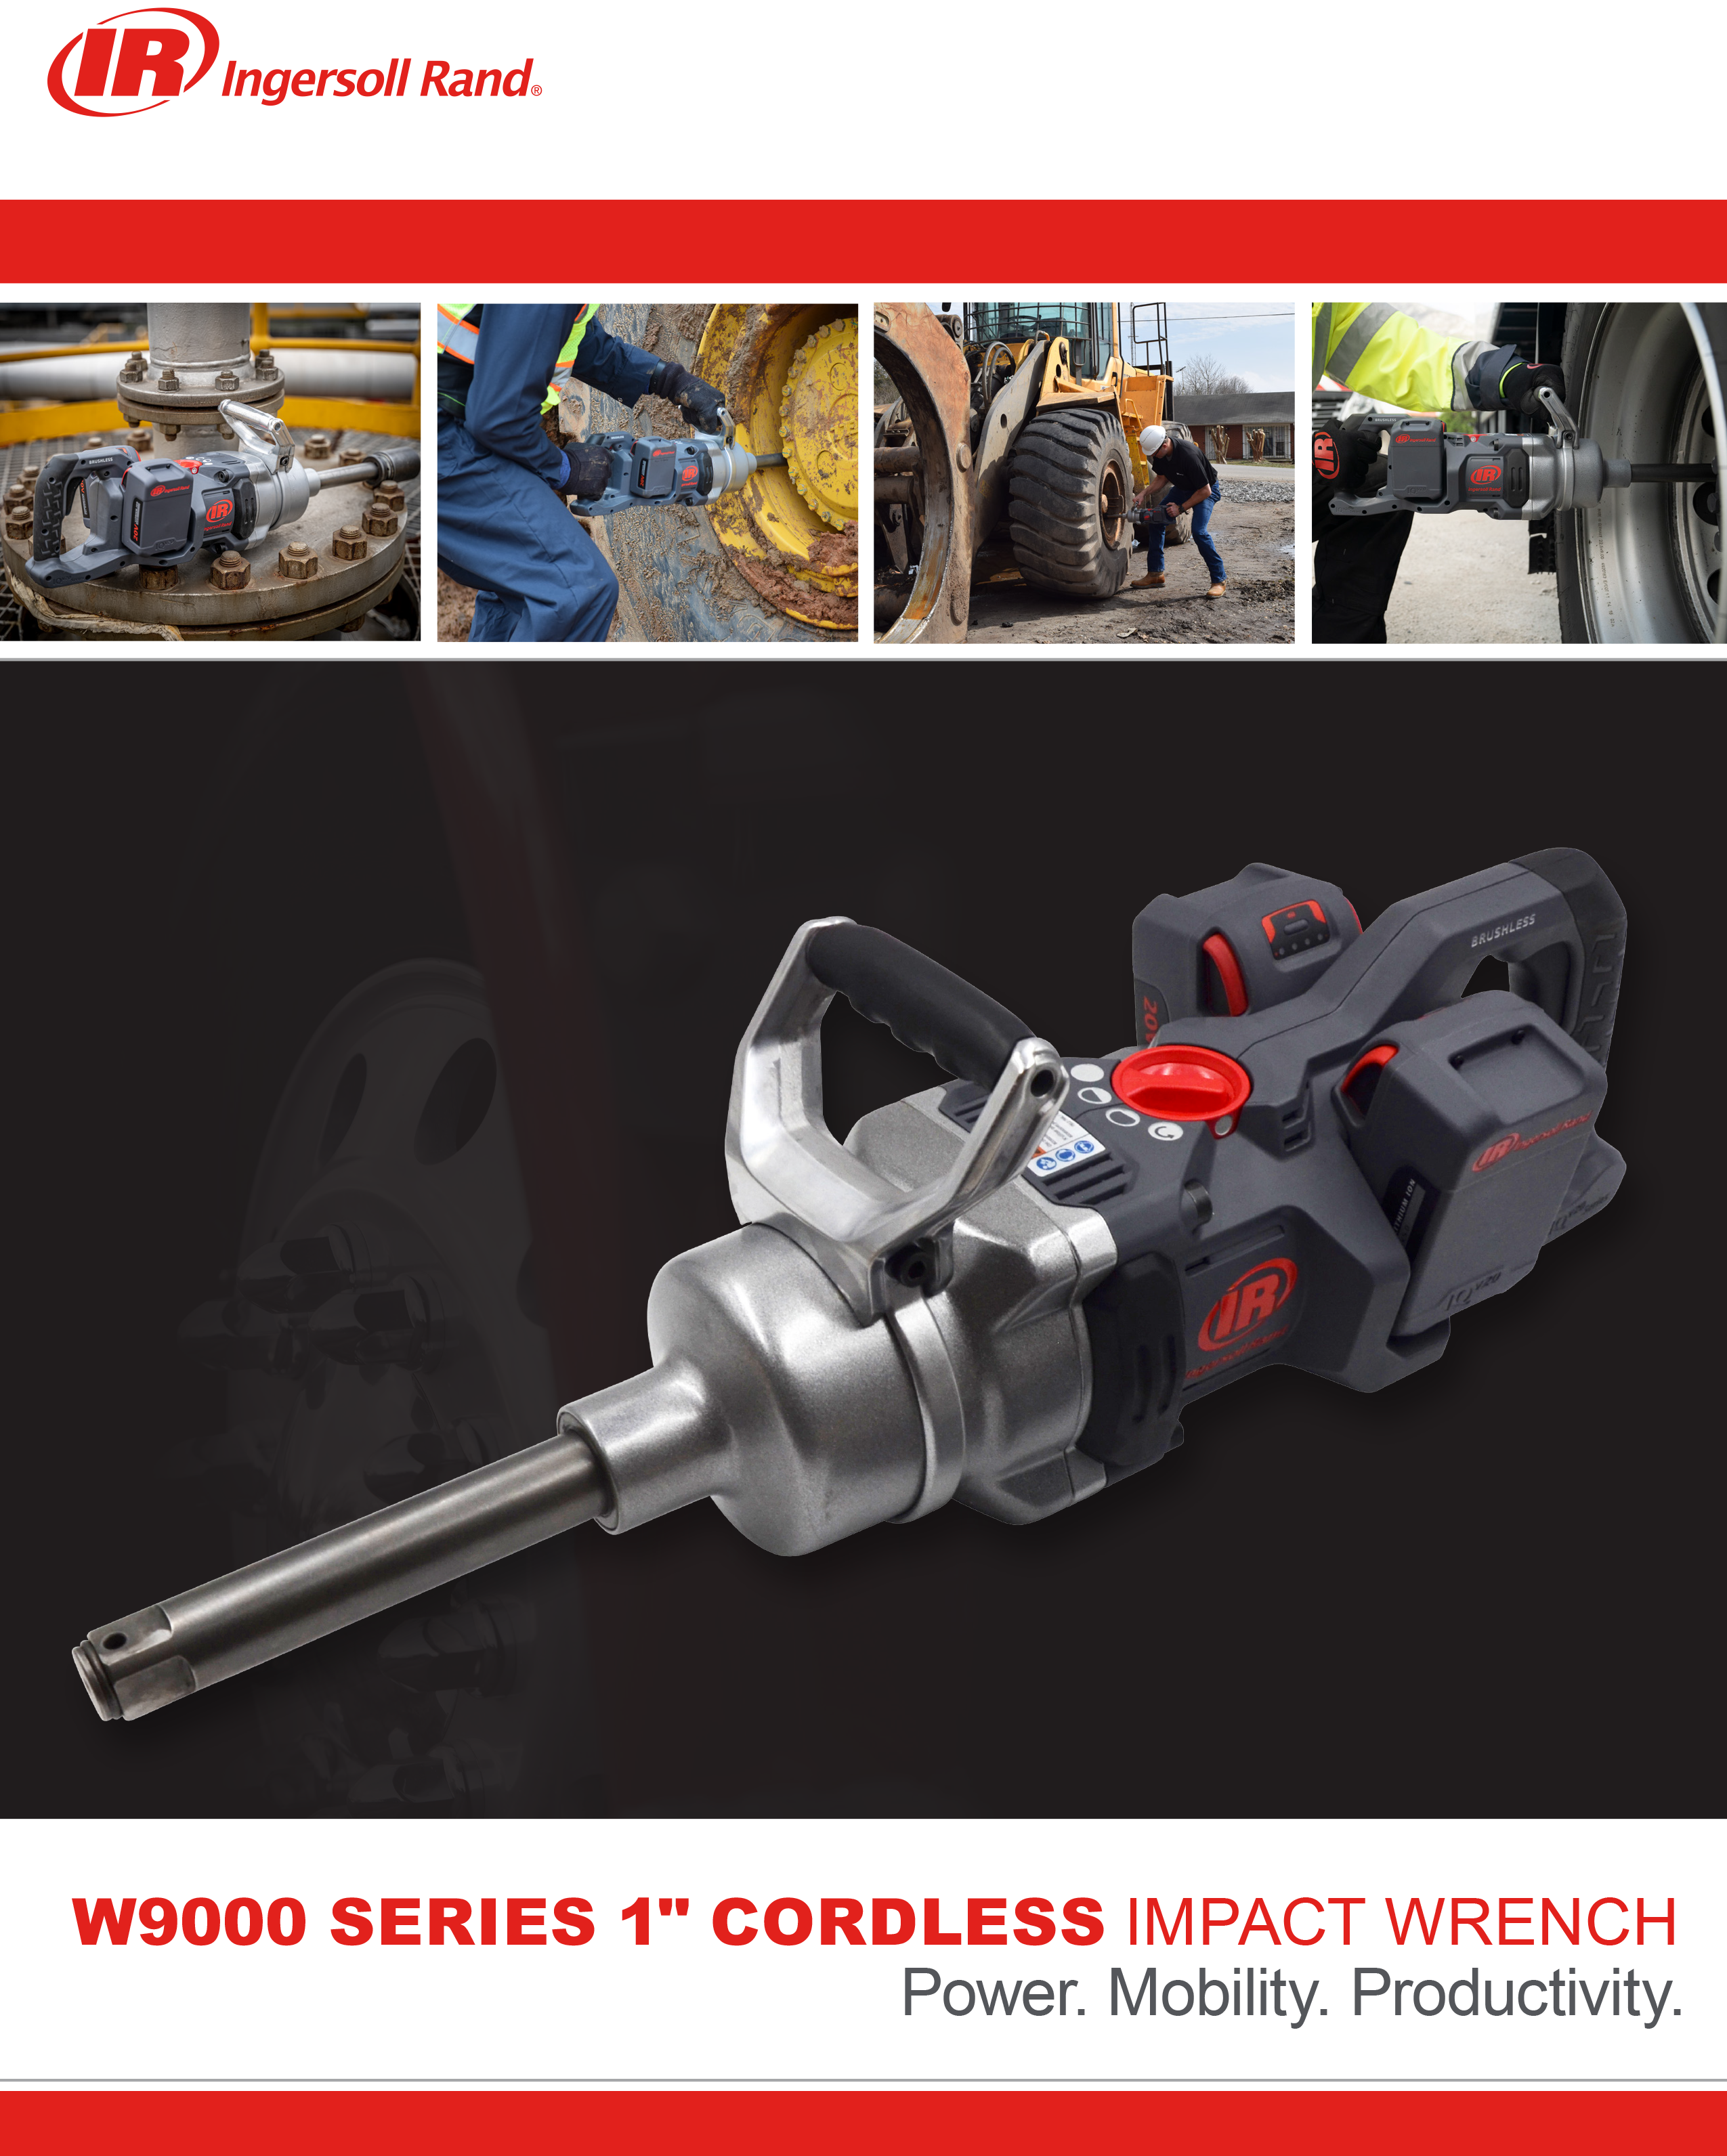 Ingersoll Rand W9000 Series High Torque Cordless Impact Wrench